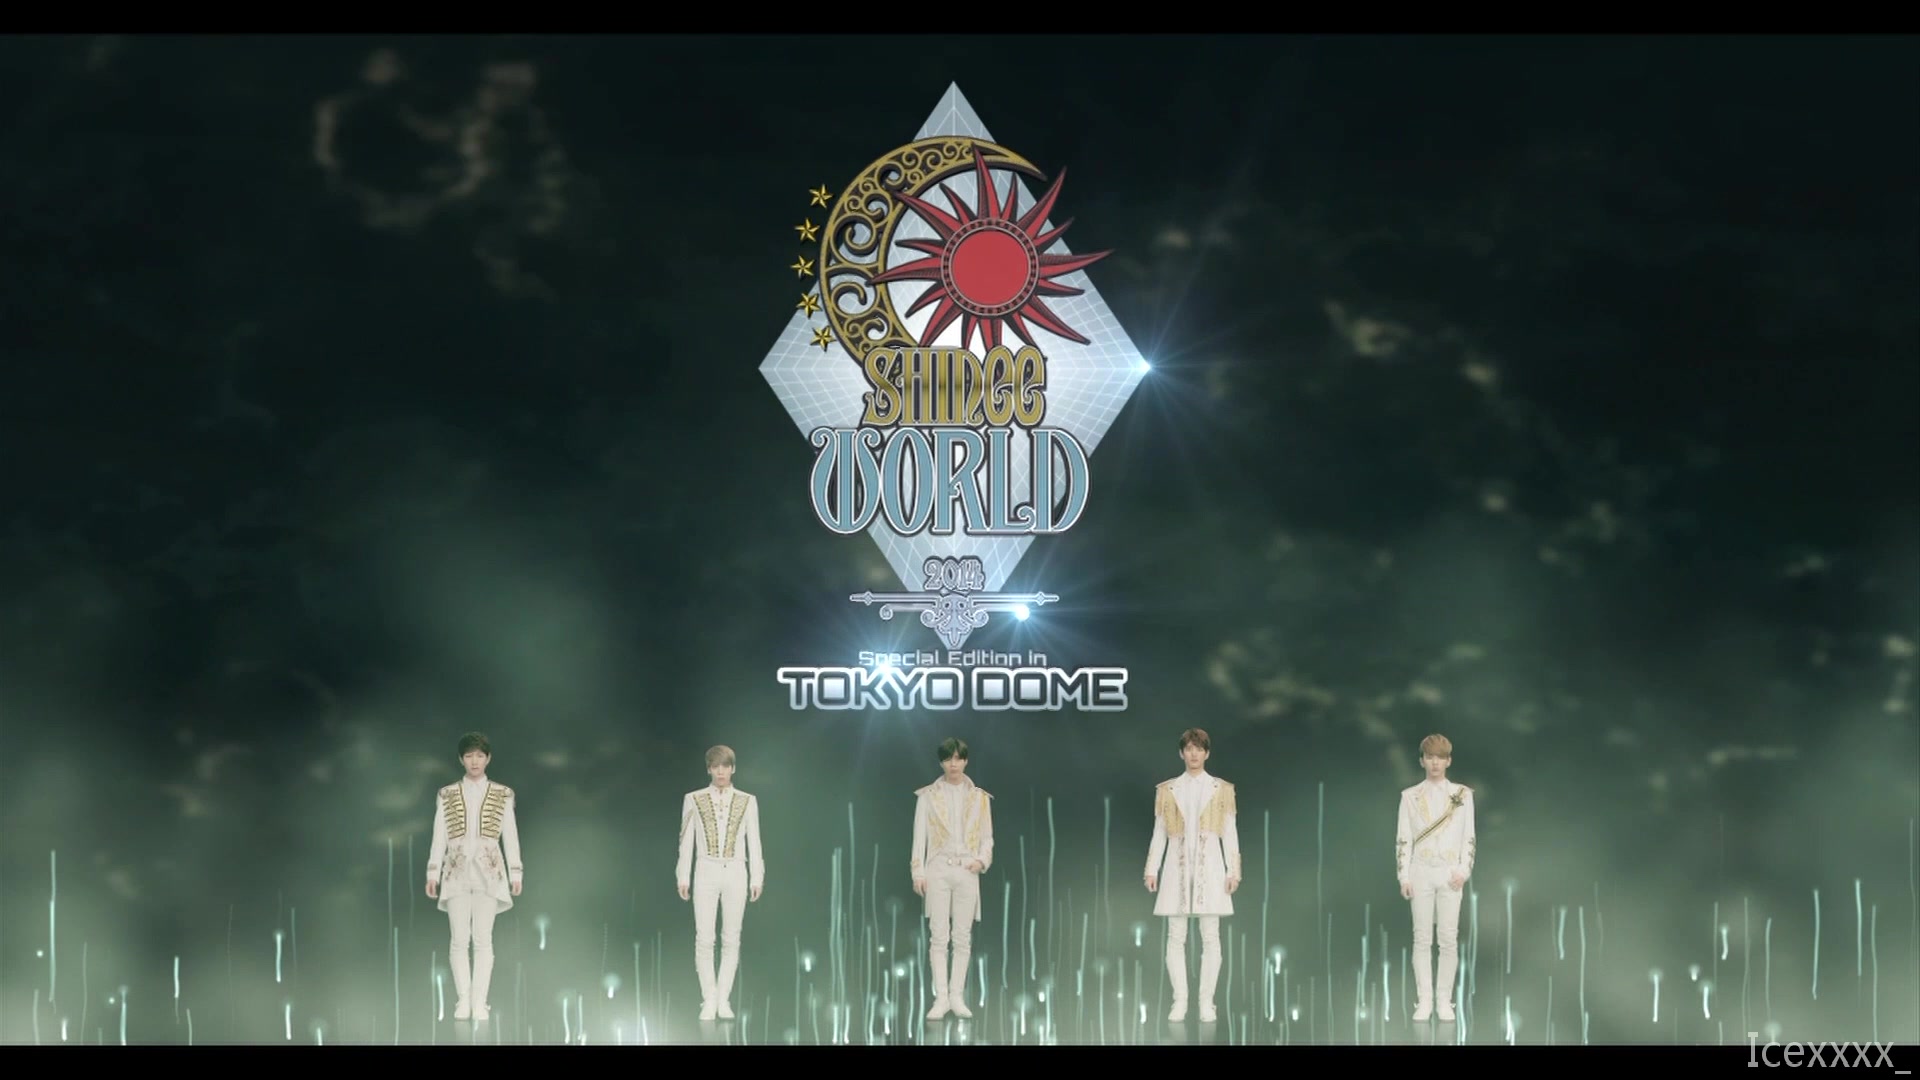 SHINee演唱会】~I'm your boy~SHINee WORLD 2014 special edition in 